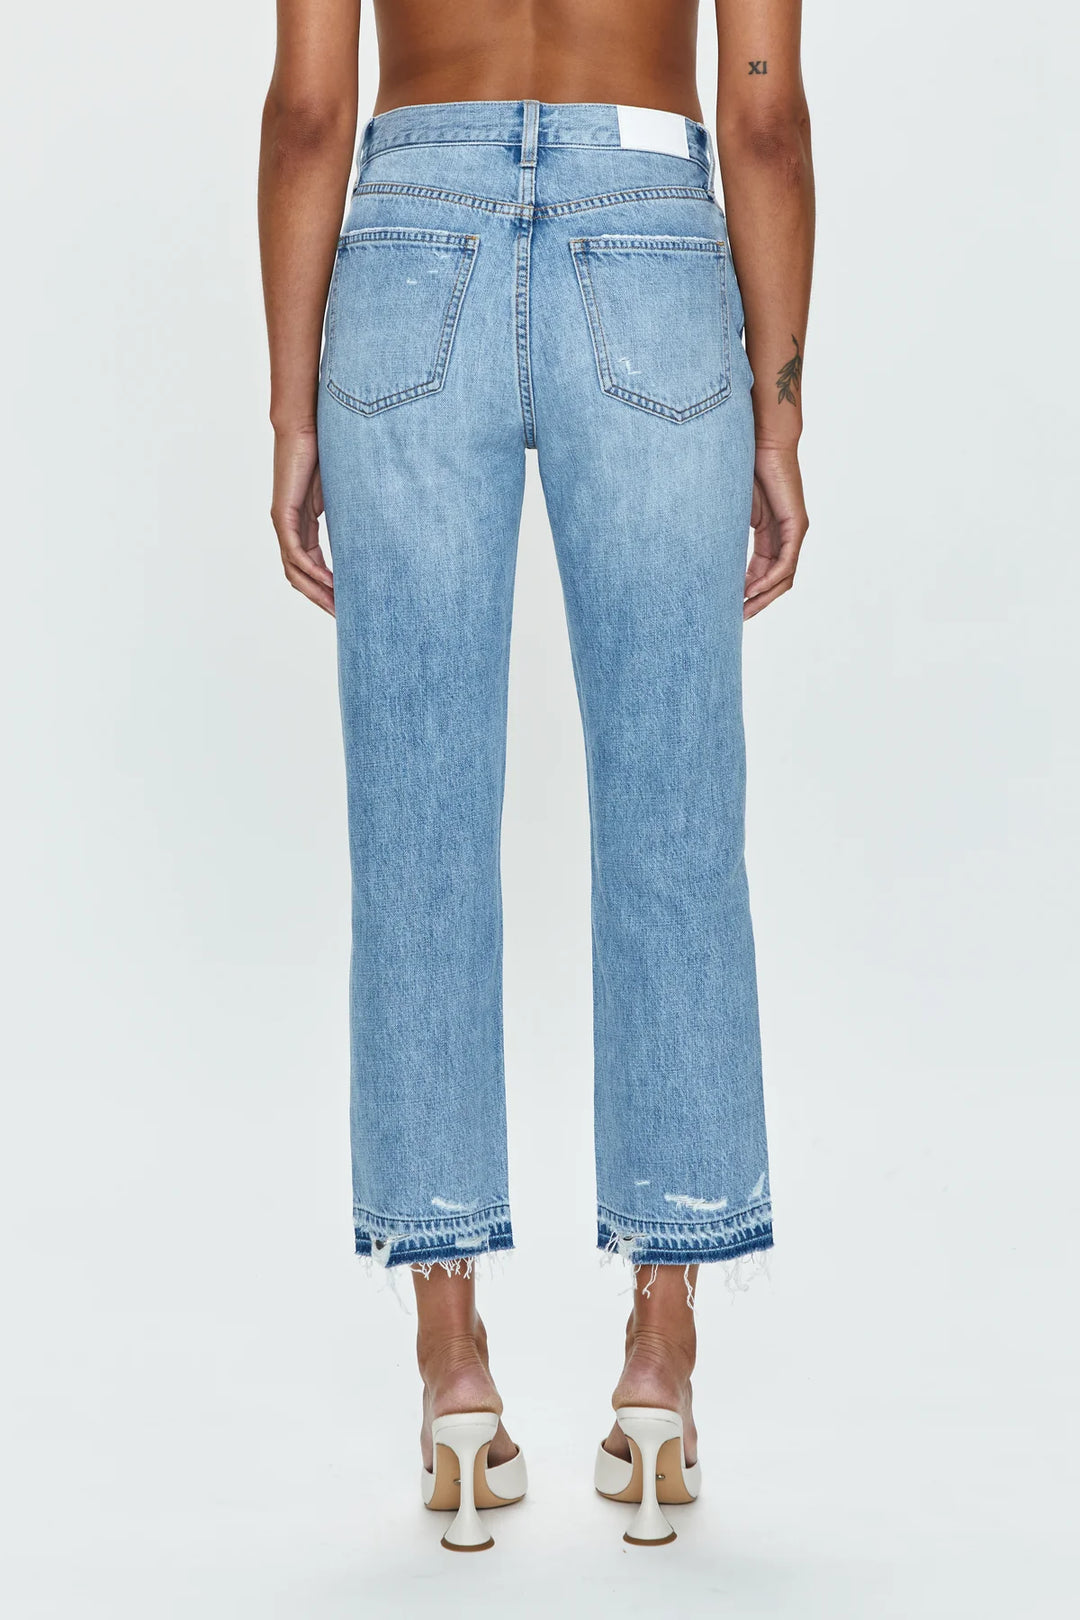 Charlie High Rise Straight Jean in Scenic Distressed